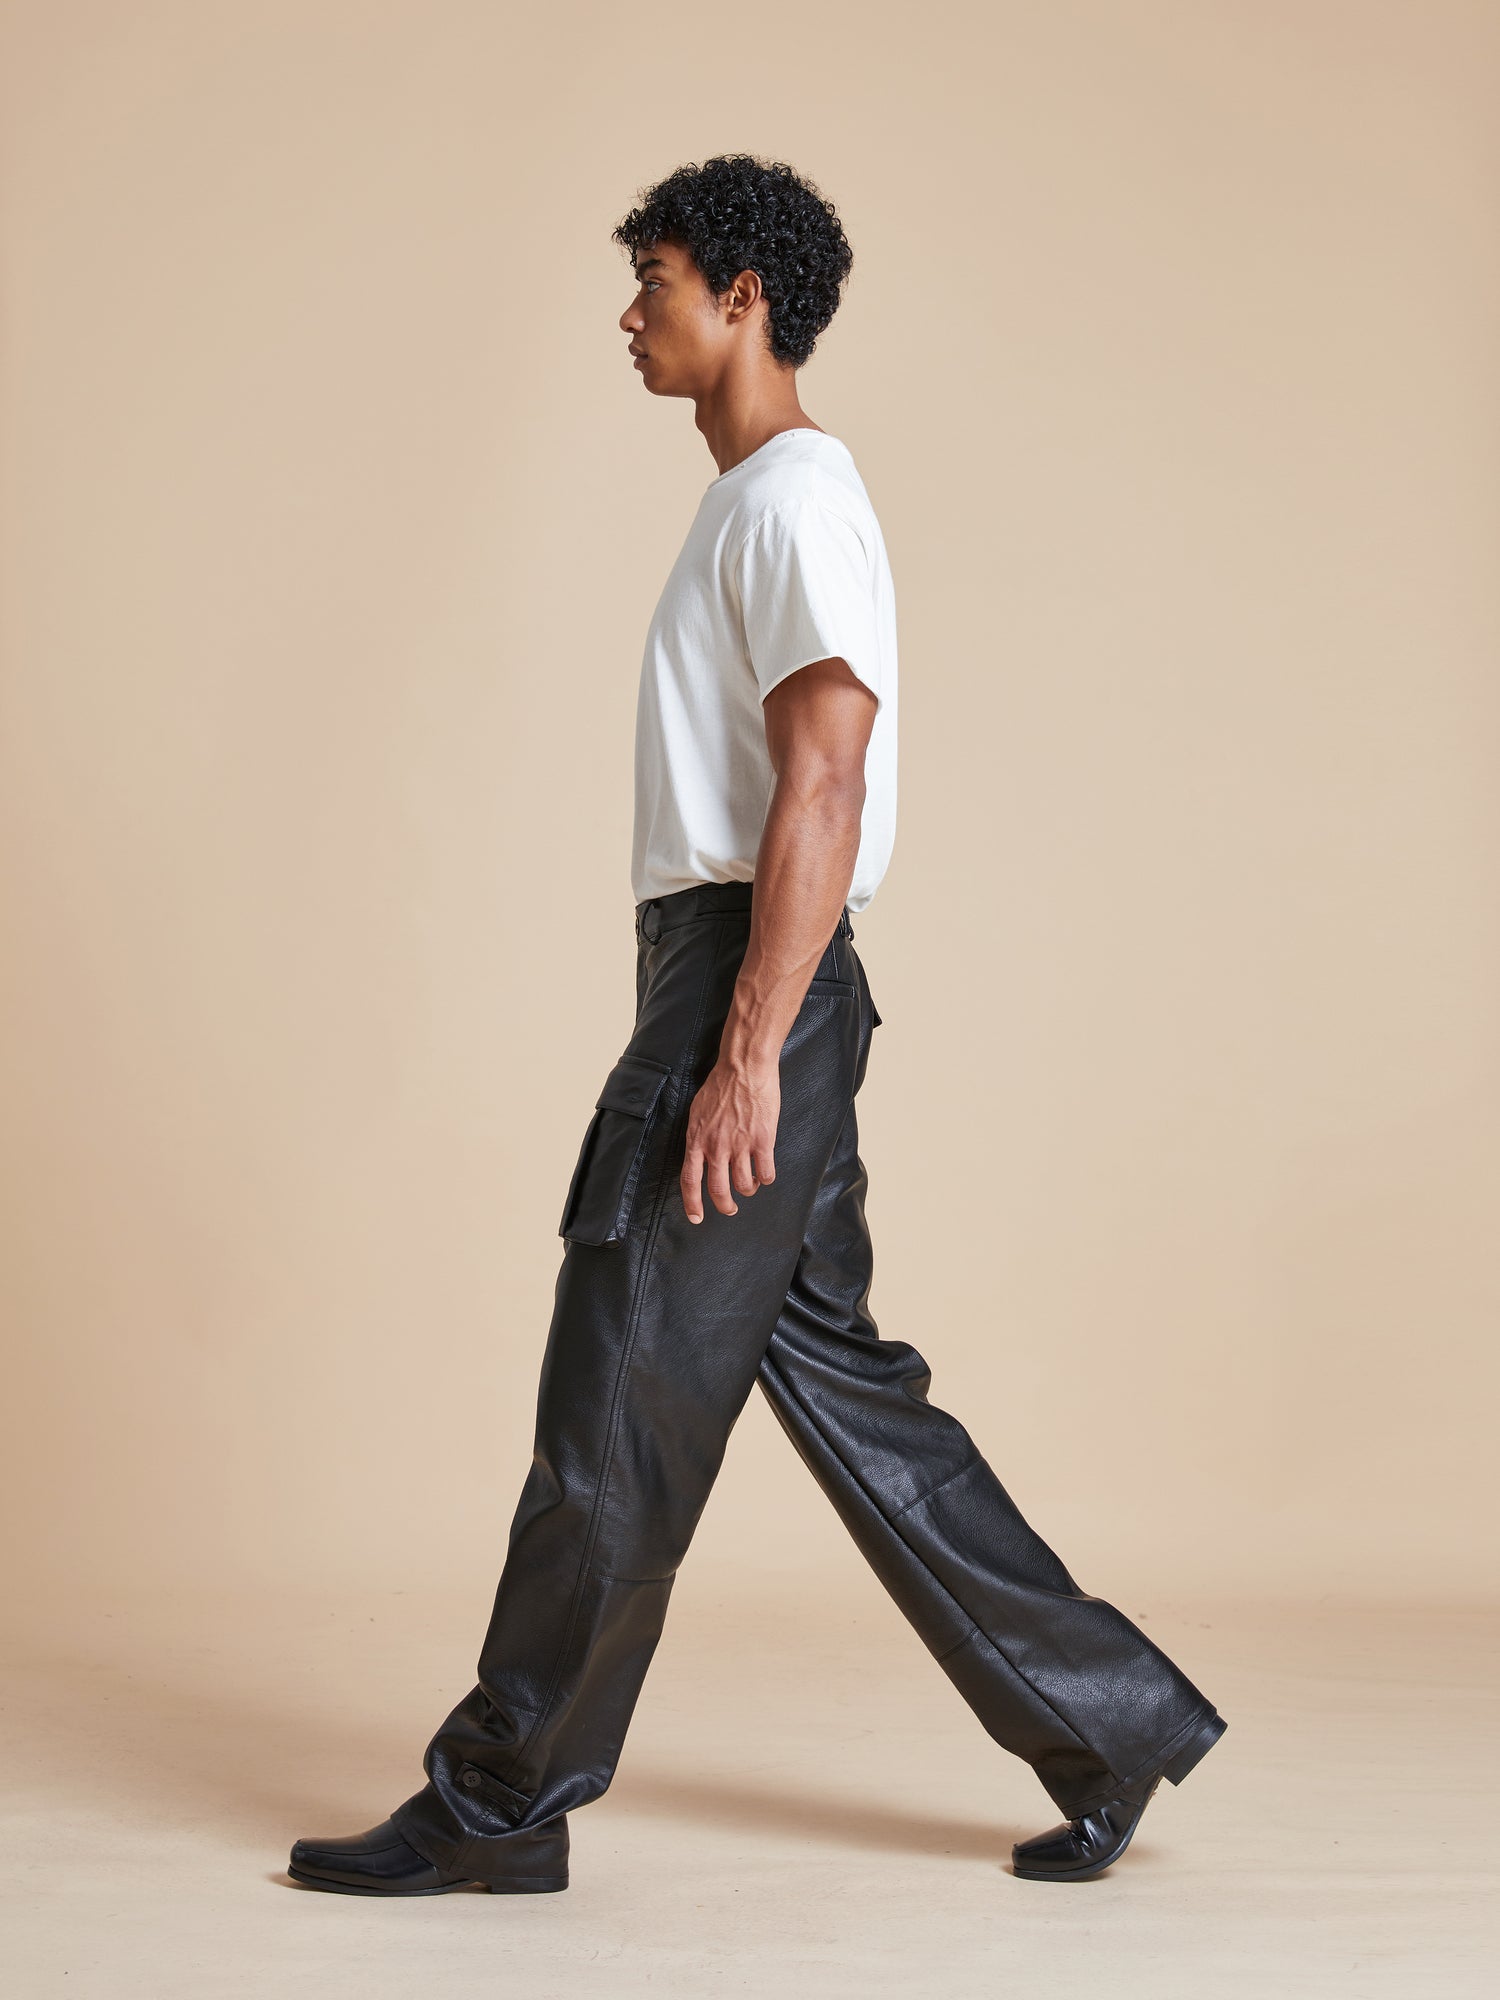 A man in Found faux leather cargo pants walking on a beige background.